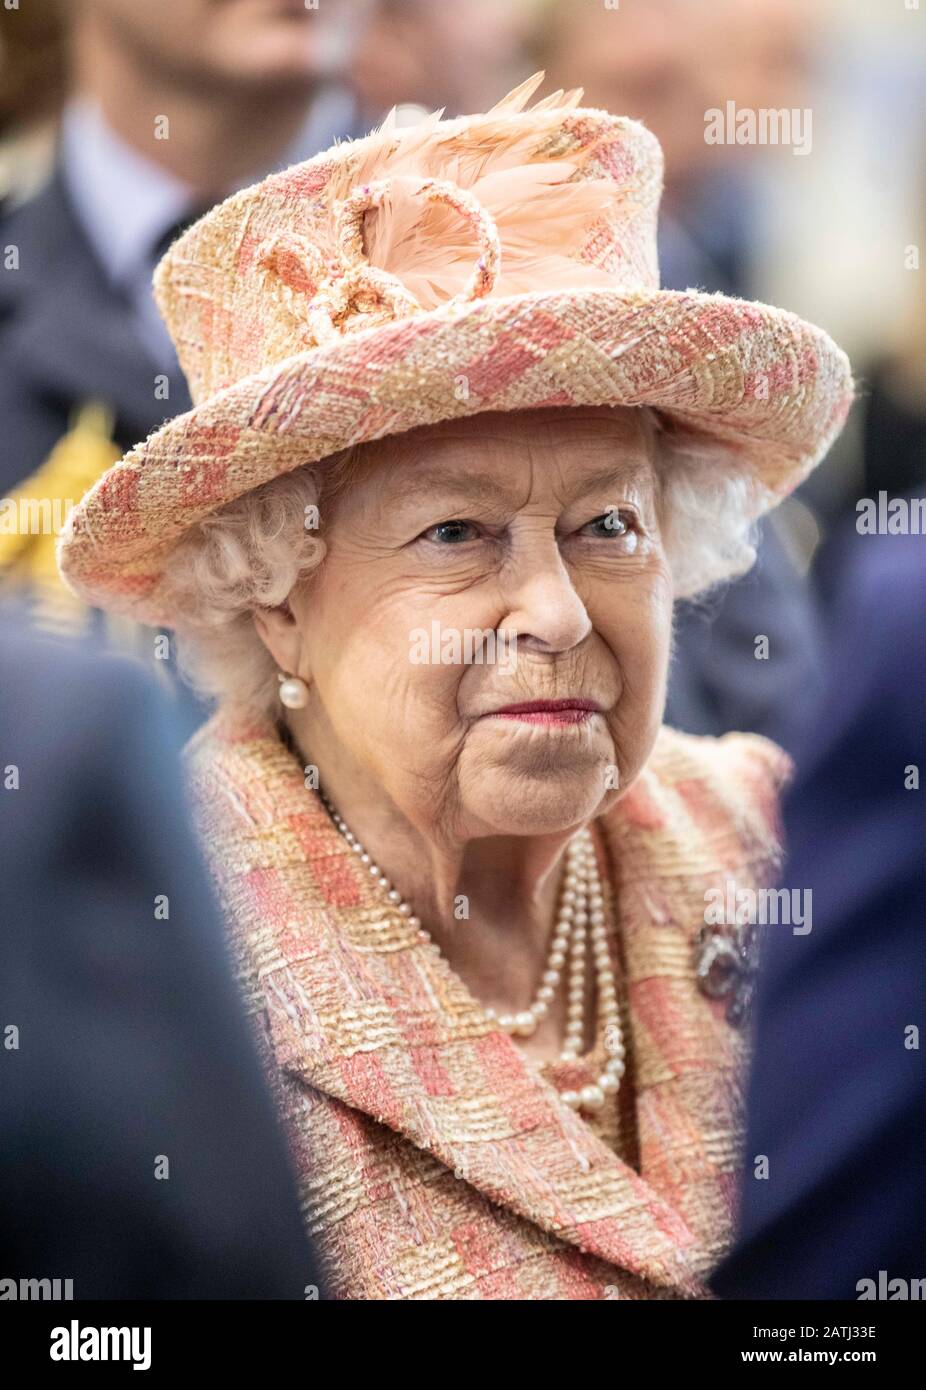 Queen Elizabeth II during a visit to Royal Air Force Marham, Norfolk, where she inspected the new integrated training centre that trains personnel on the maintenance of the new RAF F-35B Lightning II strike aircraft. Stock Photo